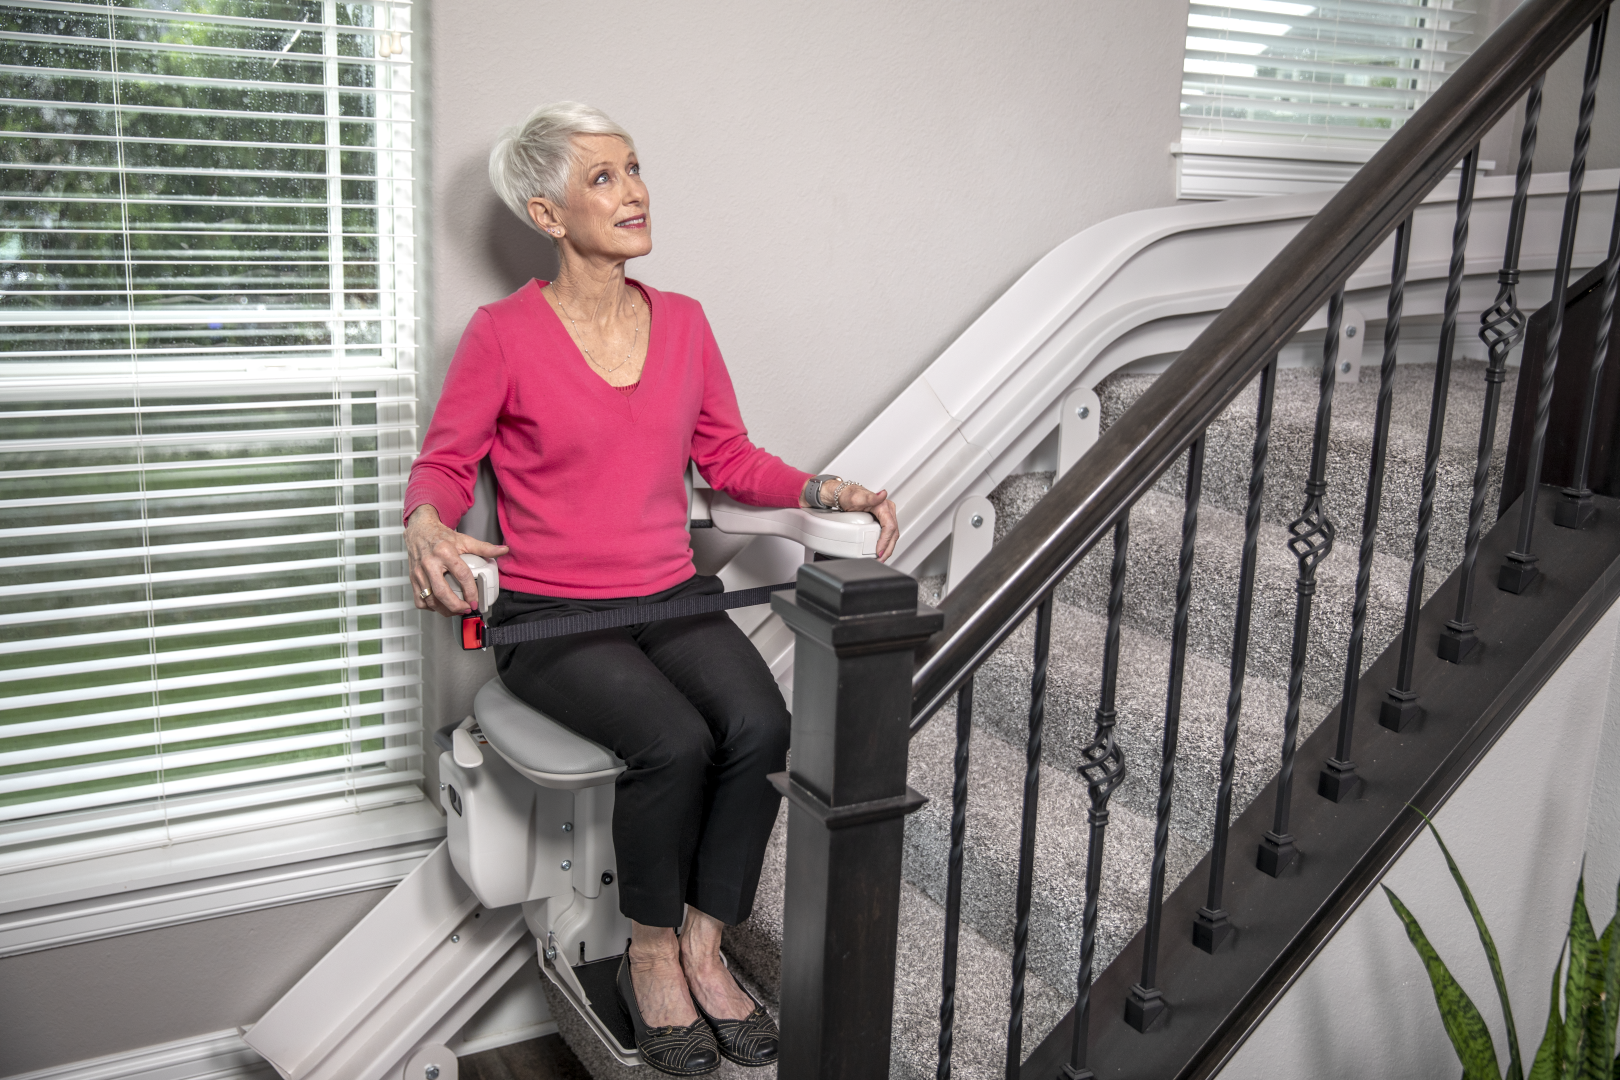 A senior woman in a bright pink shirt rides the Bruno Elite stairlift down her stairs.